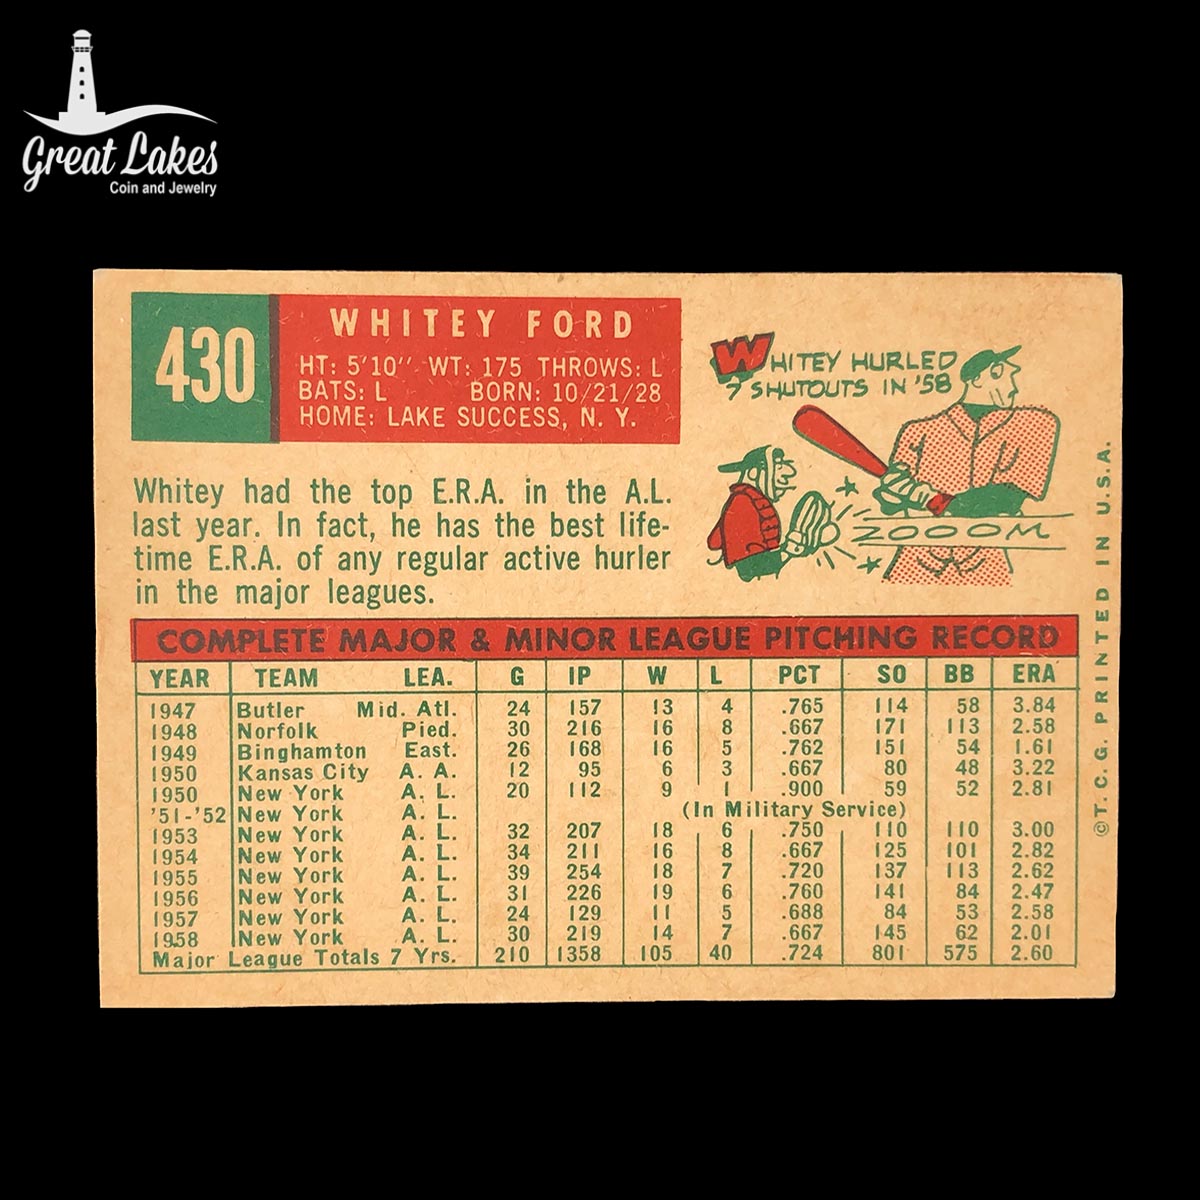 1959 Topps Whitey Ford Card #430